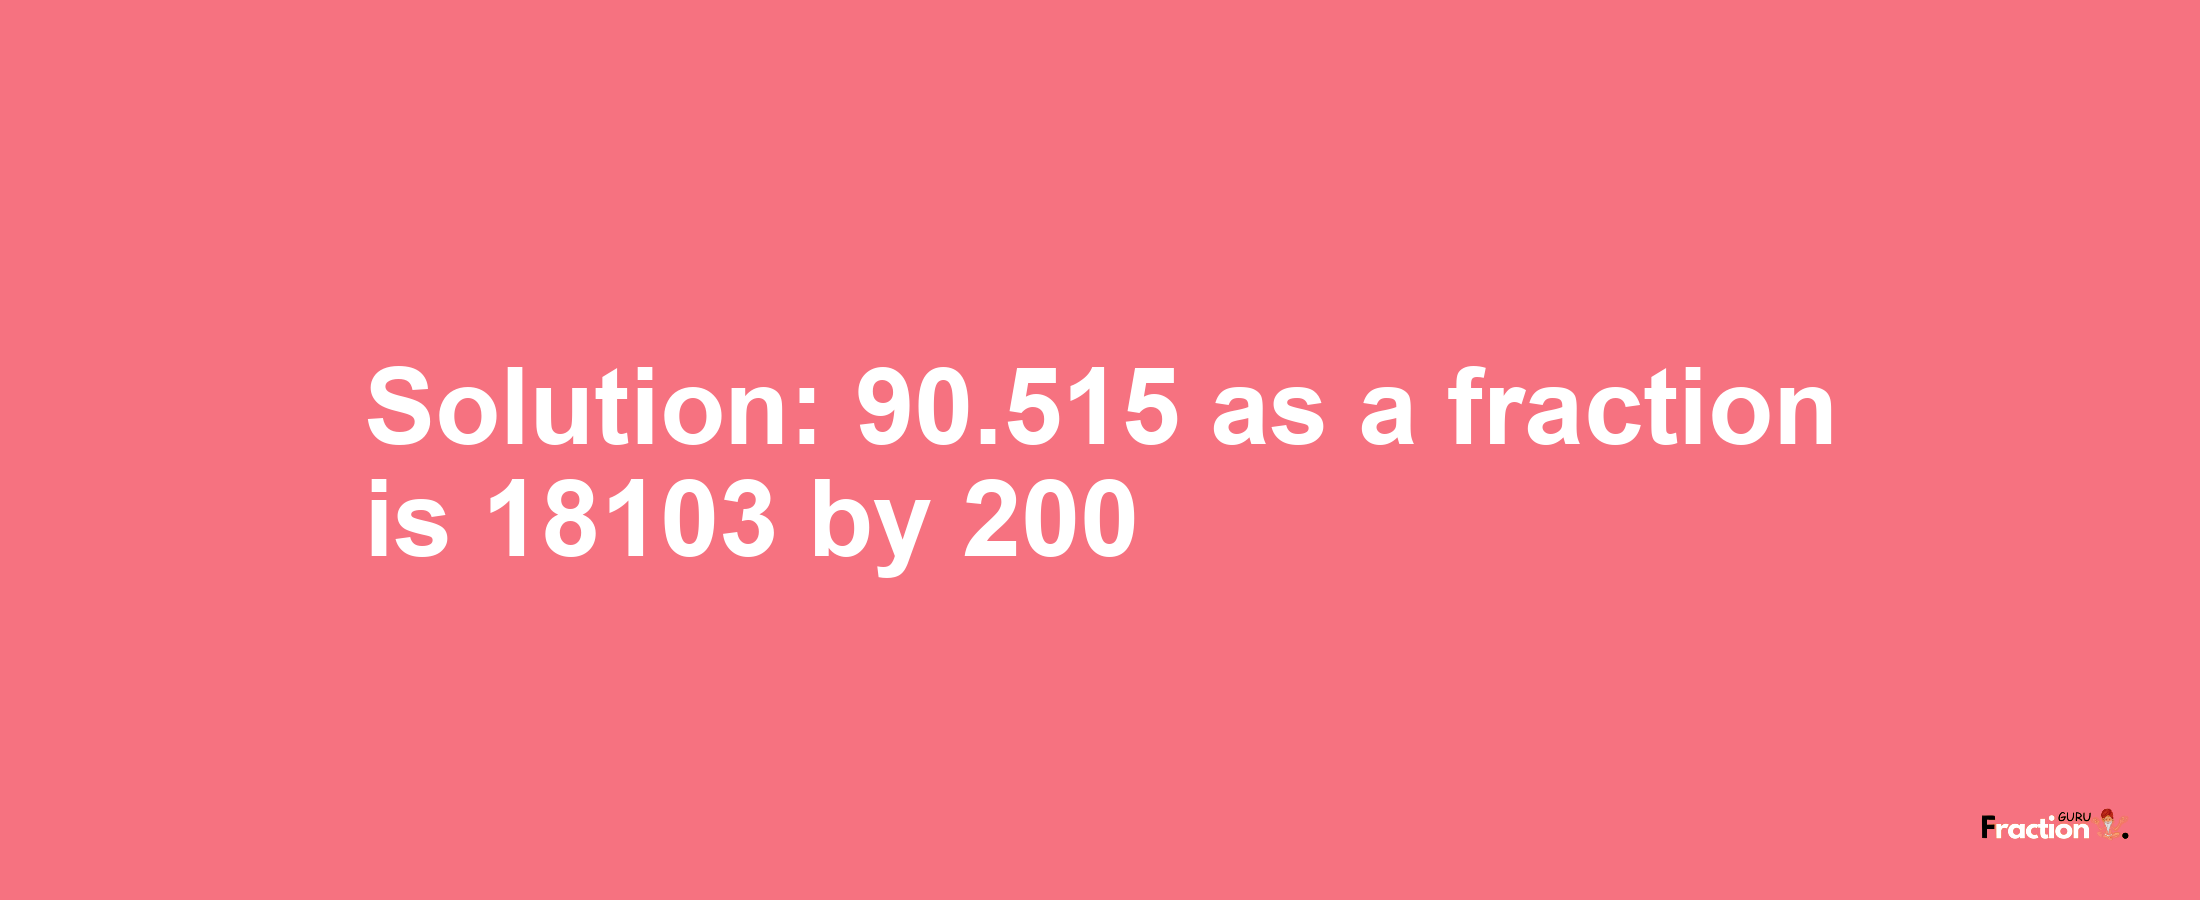 Solution:90.515 as a fraction is 18103/200